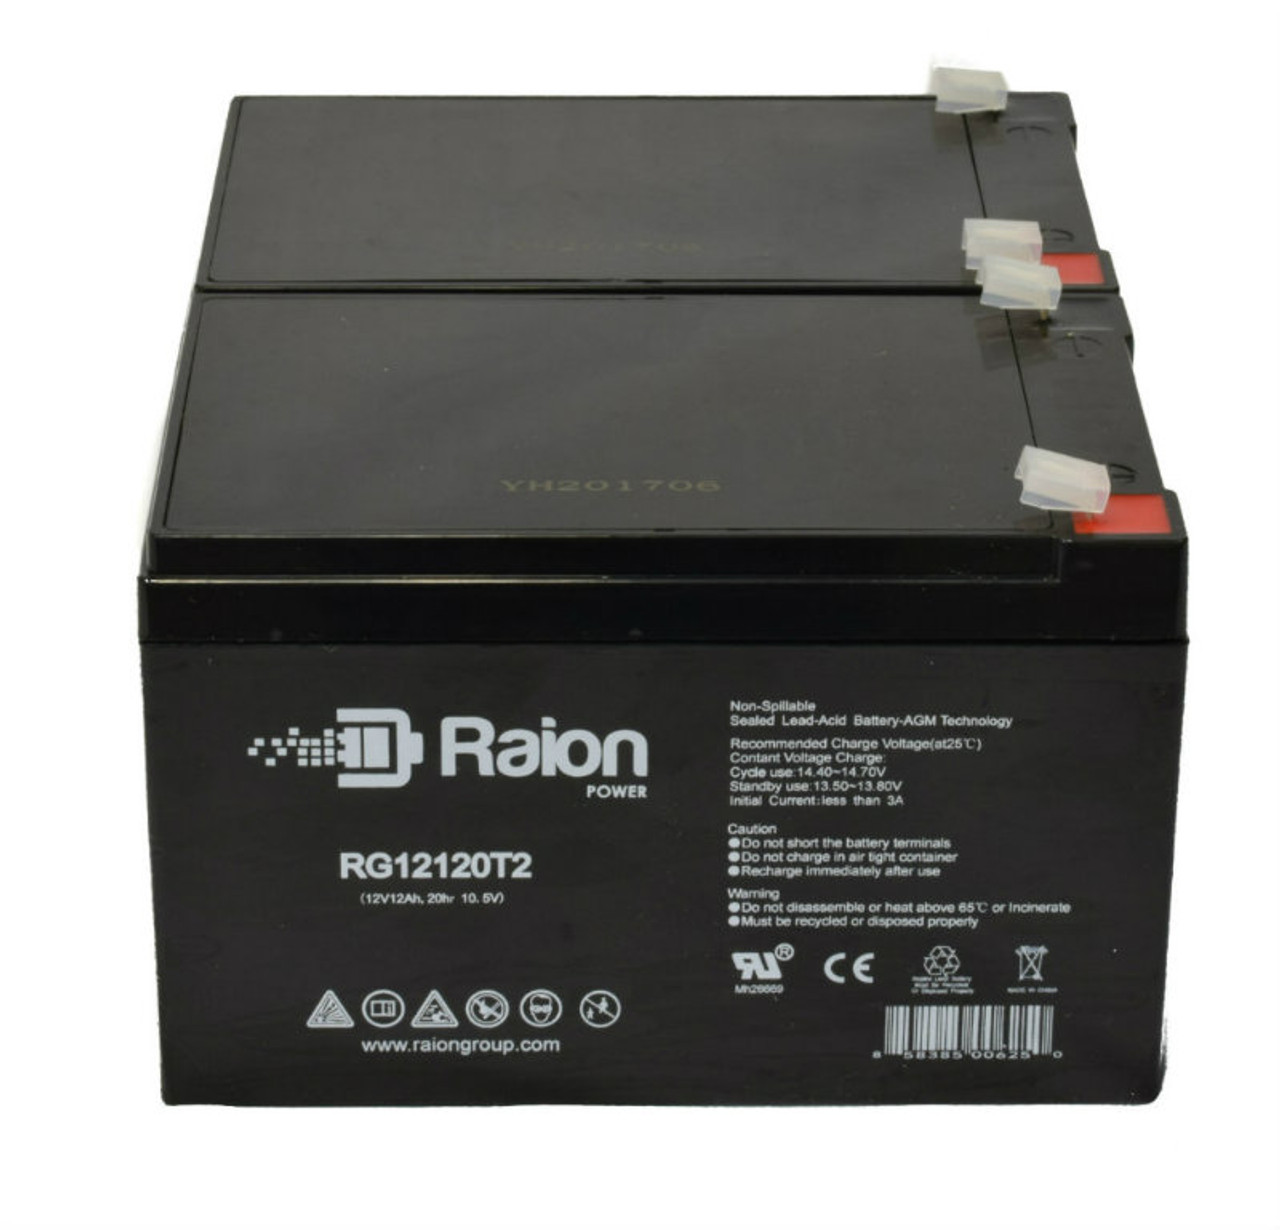 Raion Power 12V 12Ah Non-Spillable Compatible Replacement Battery for Rascal 140F (2) - (2 Pack)